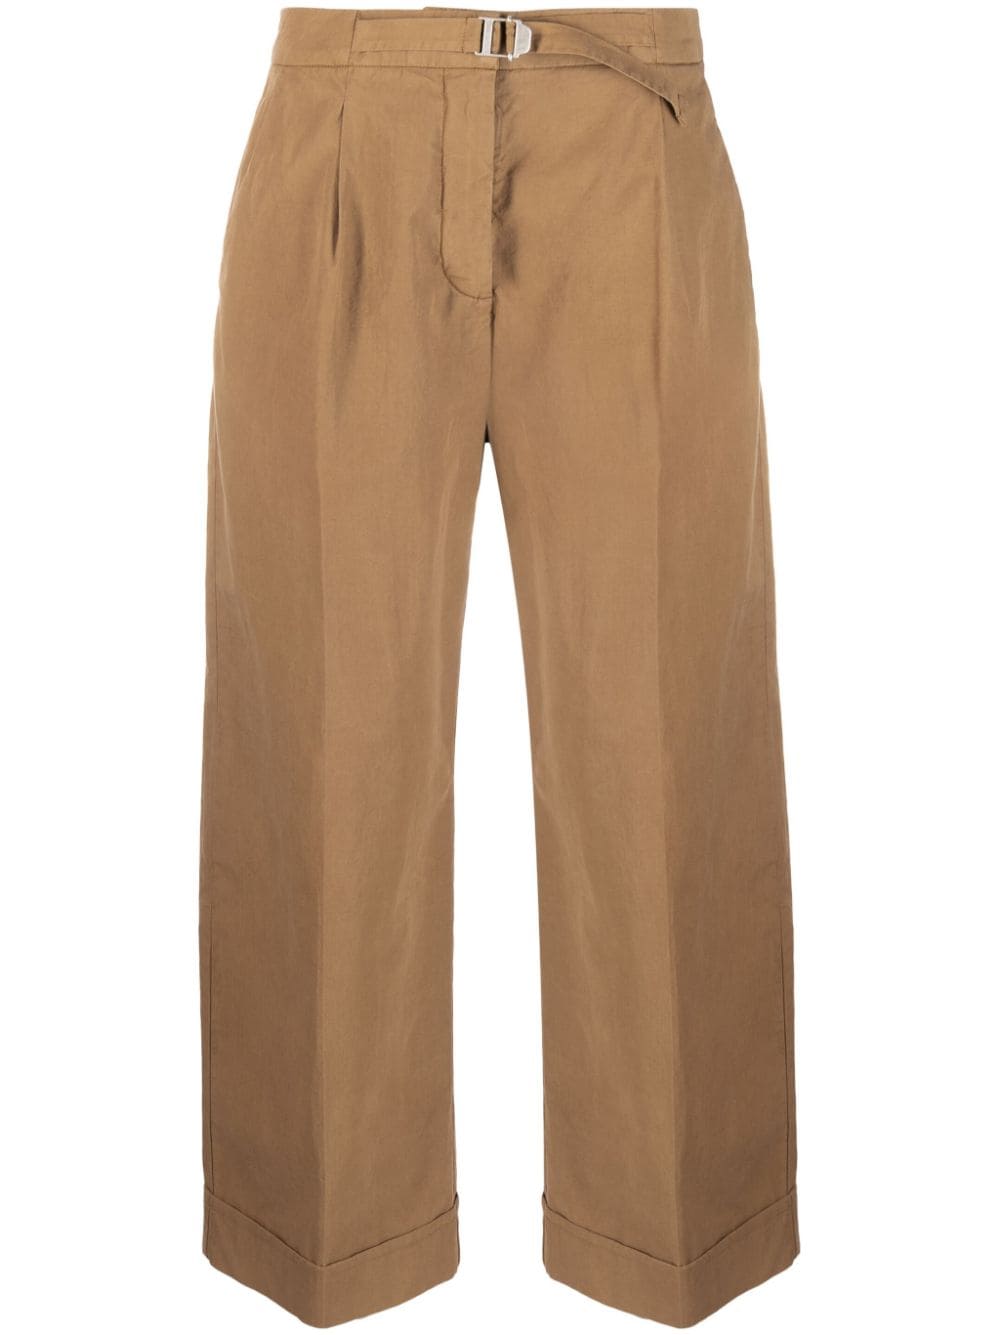 Euphemia belted wide-leg trousers